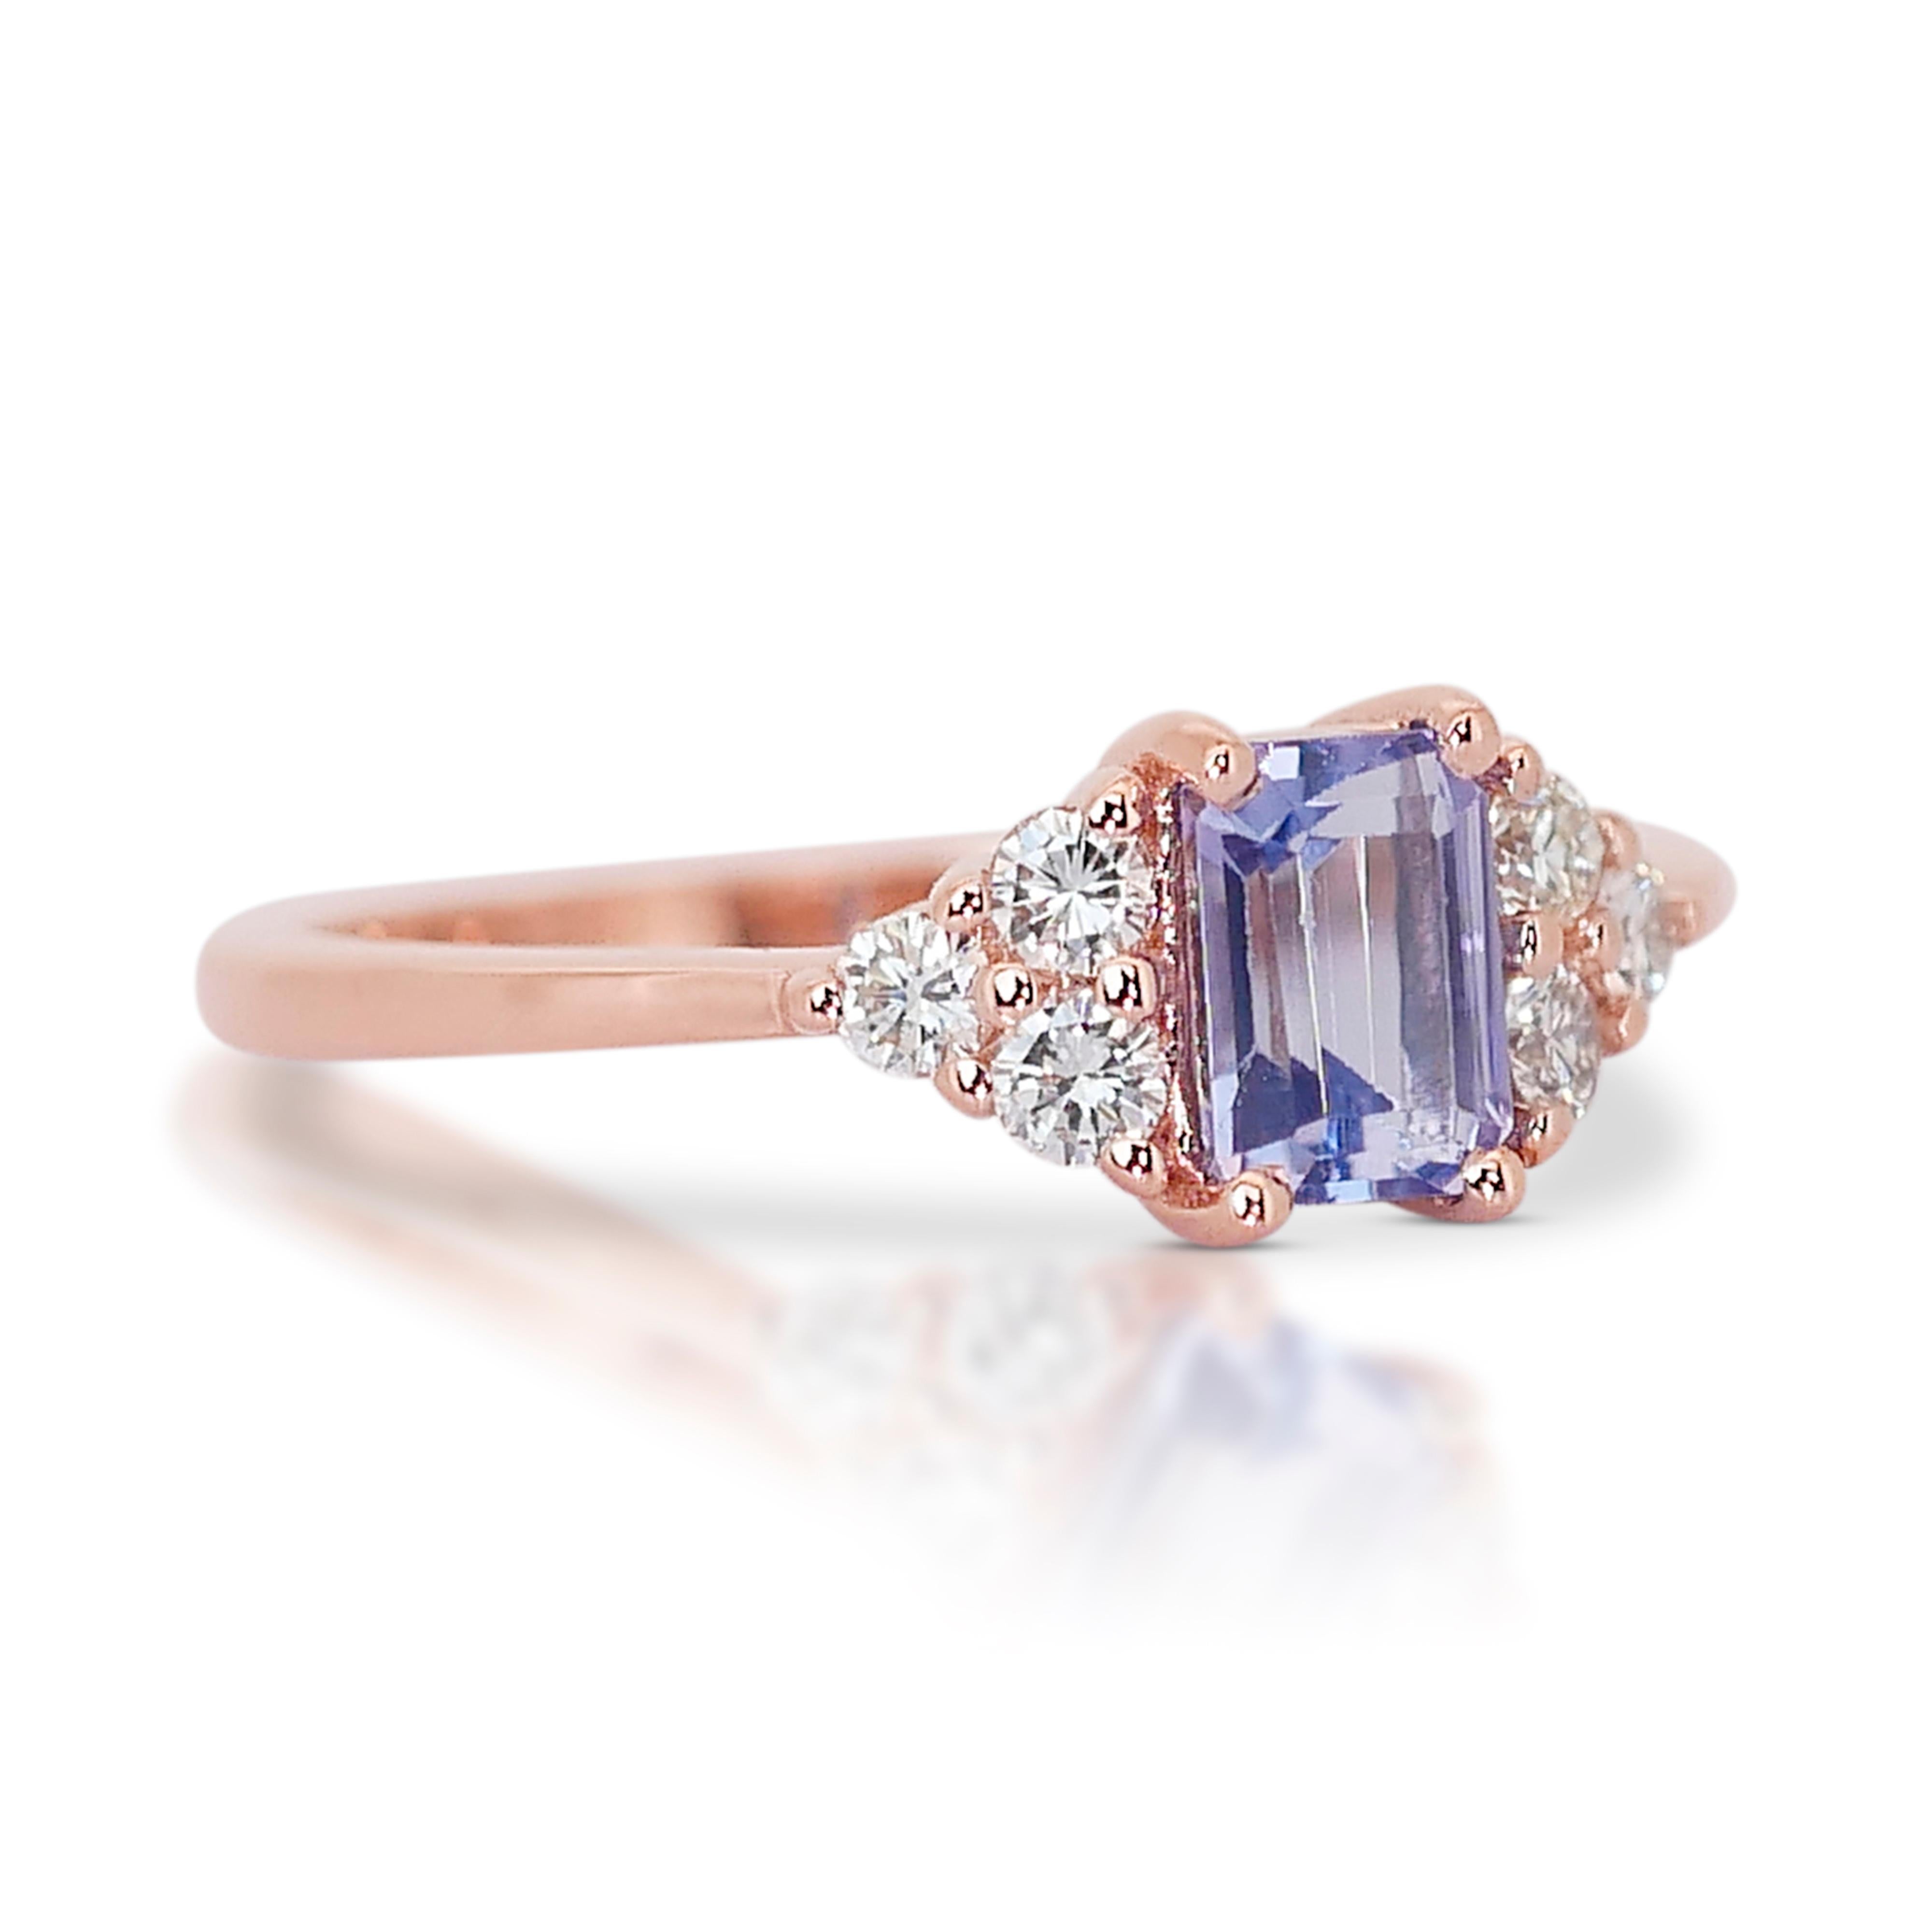 Captivating 1.14 ct Tanzanite and Diamond Pave Ring in 14k Rose Gold - IGI  In New Condition For Sale In רמת גן, IL